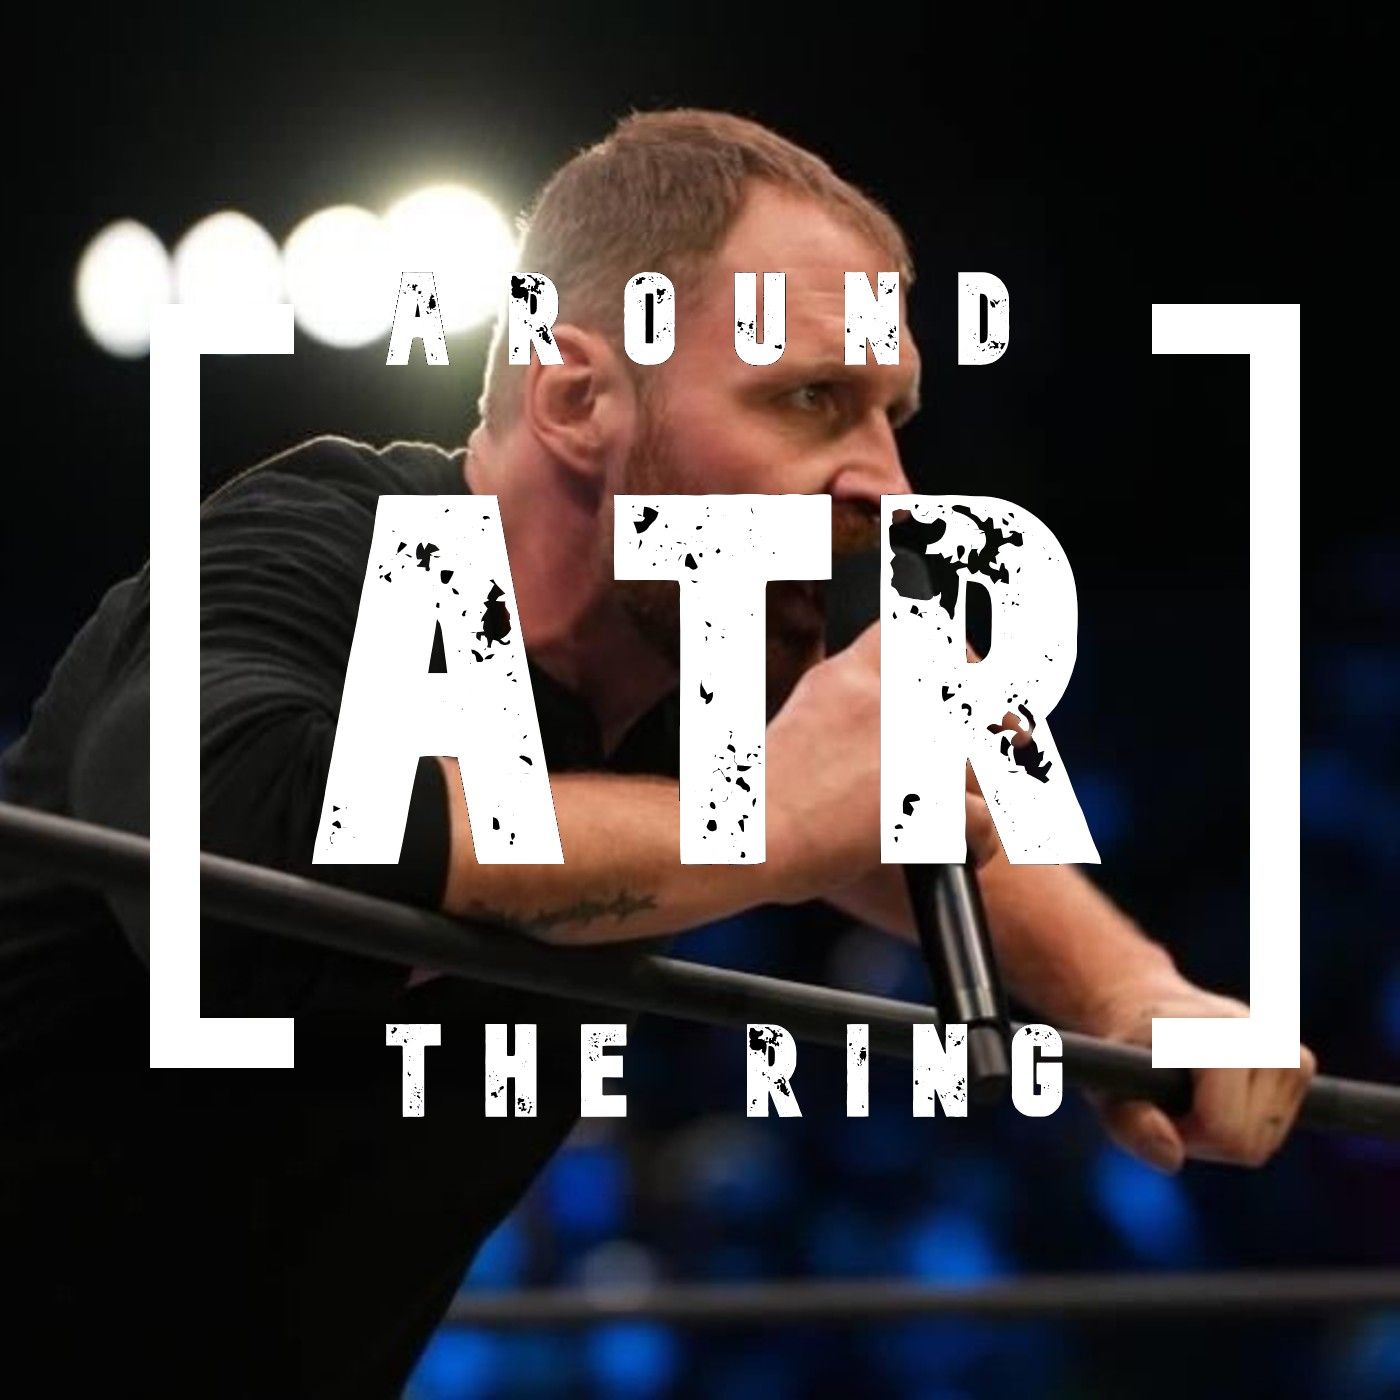 ATR 277: GCW The Wrld, Independent Wrestling and Future Stars